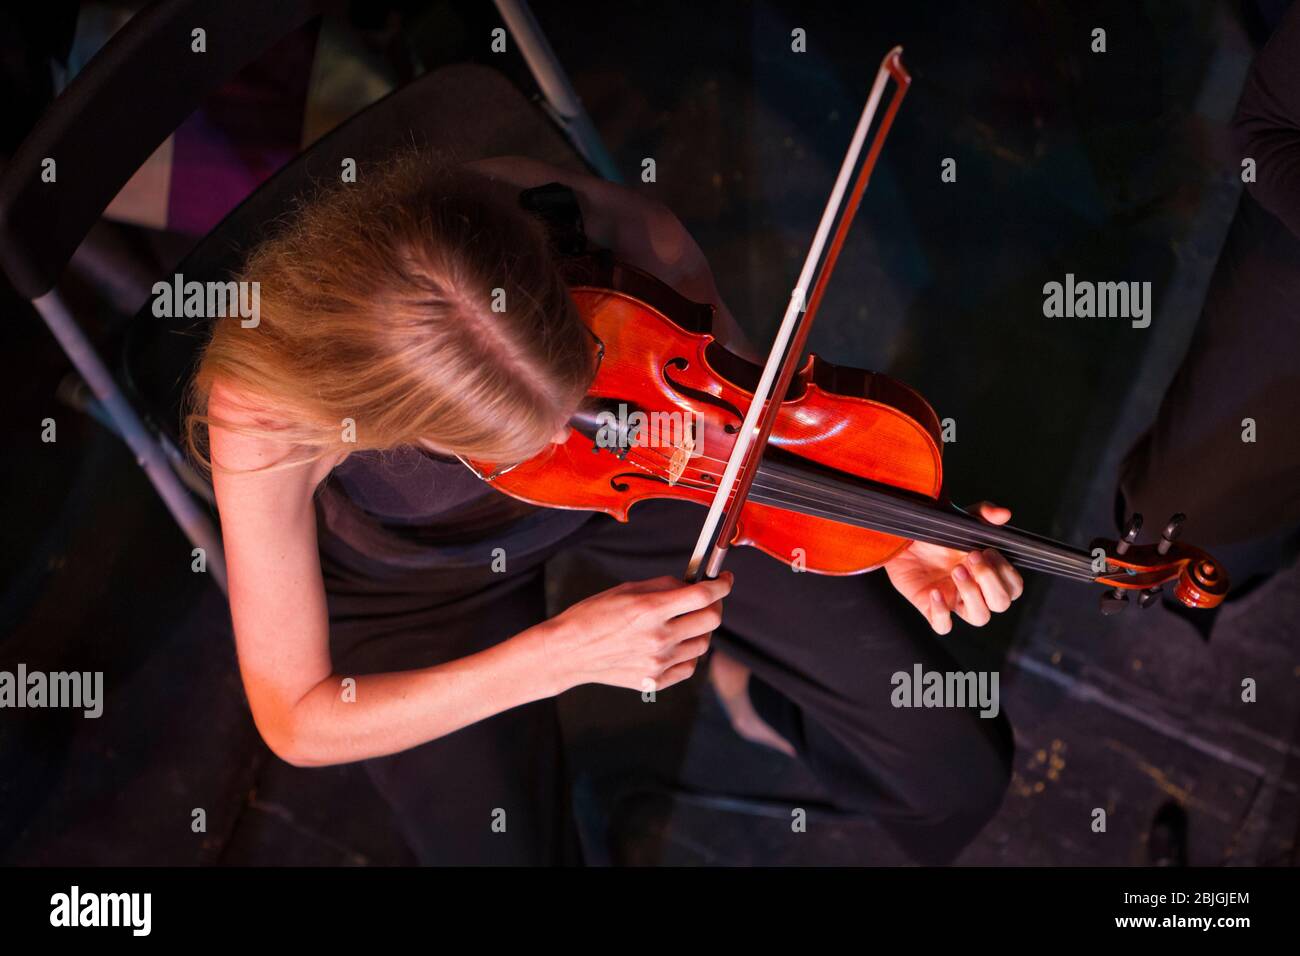 Overhead view of violin player (model released) performing in classical orchestra. Stock Photo